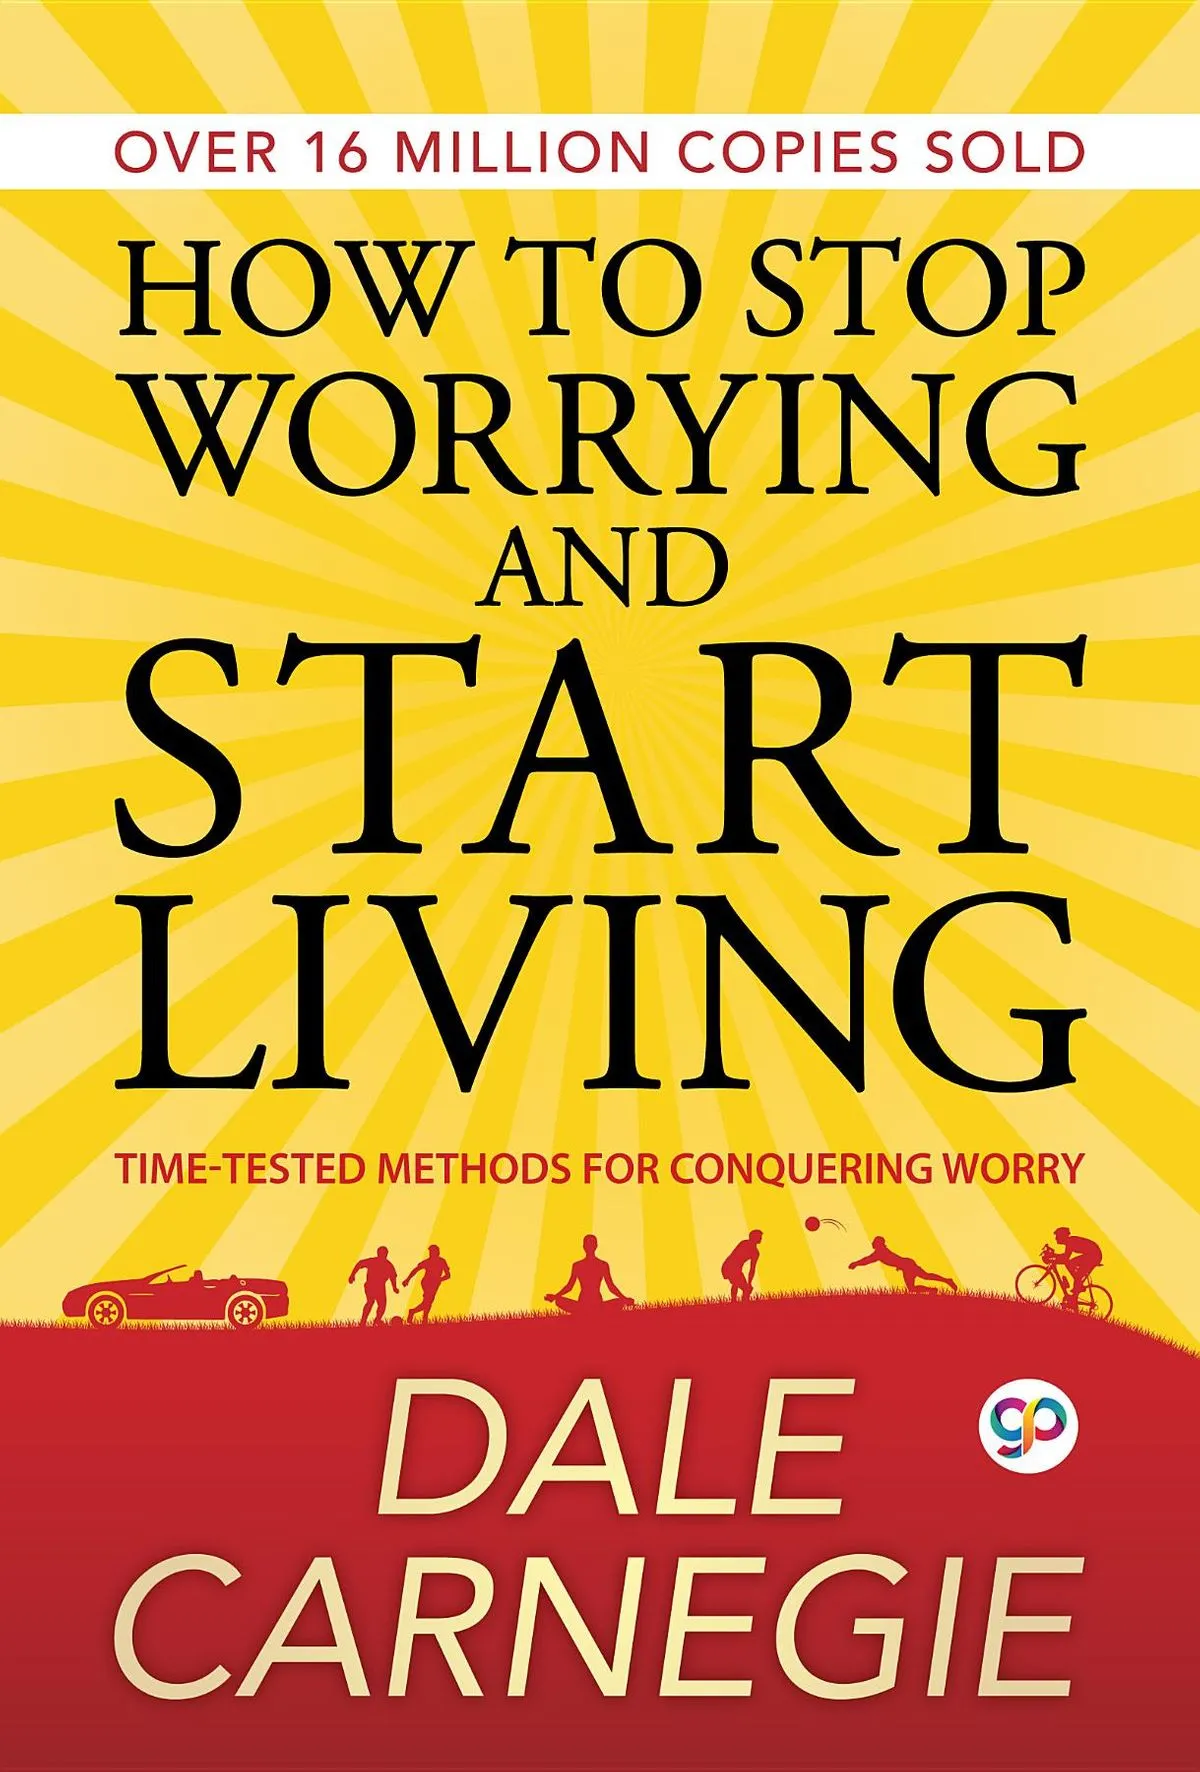 How To Stop Worrying And Start Living (Dale Carnegie)